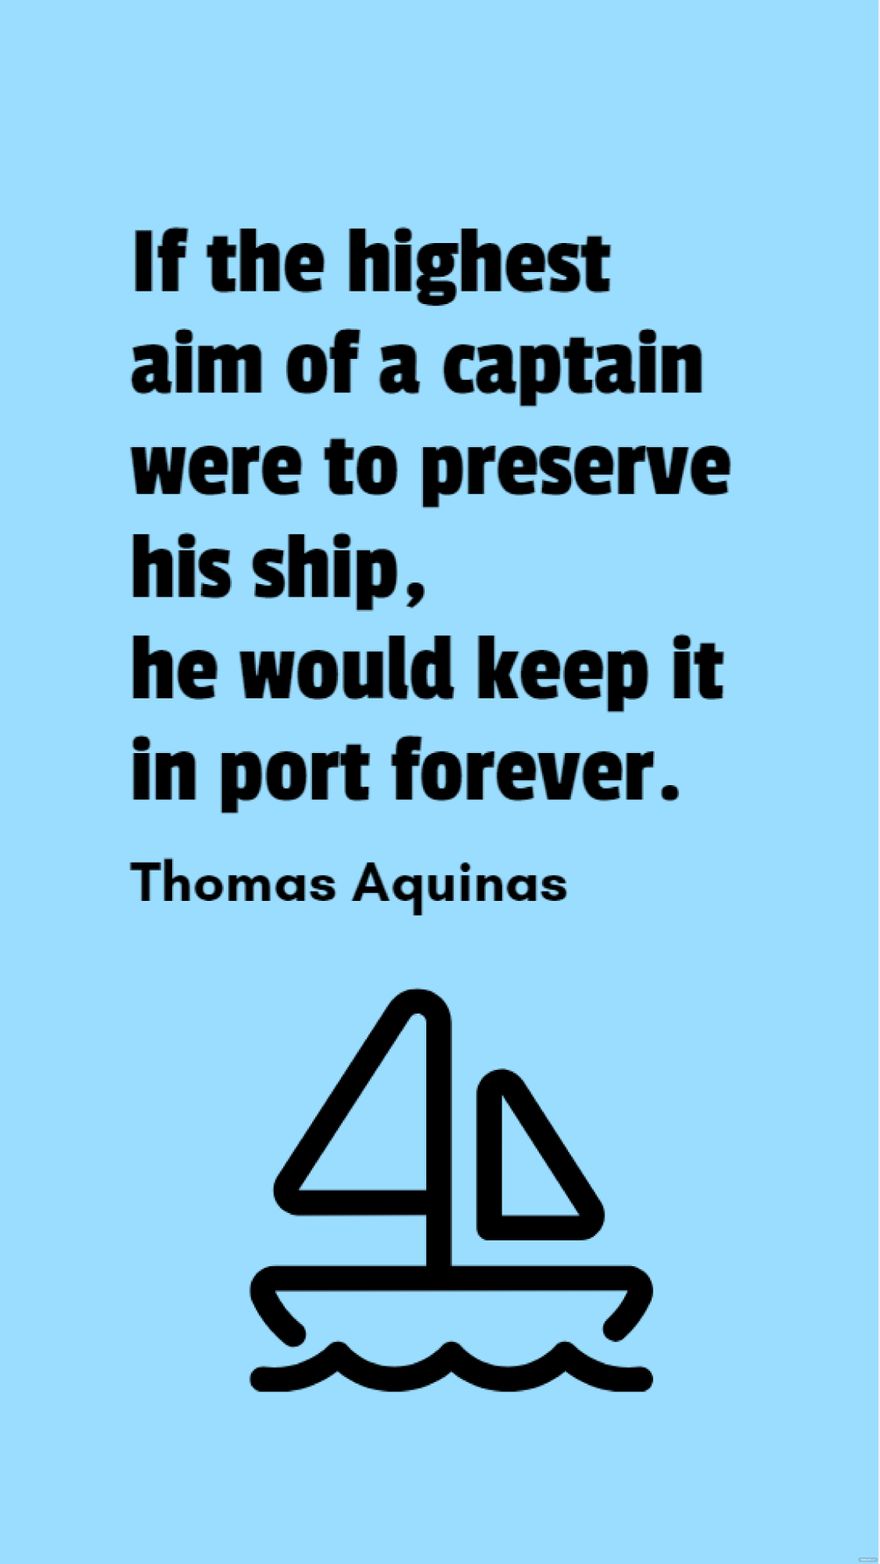 Thomas Aquinas - If the highest aim of a captain were to preserve his ship, he would keep it in port forever.